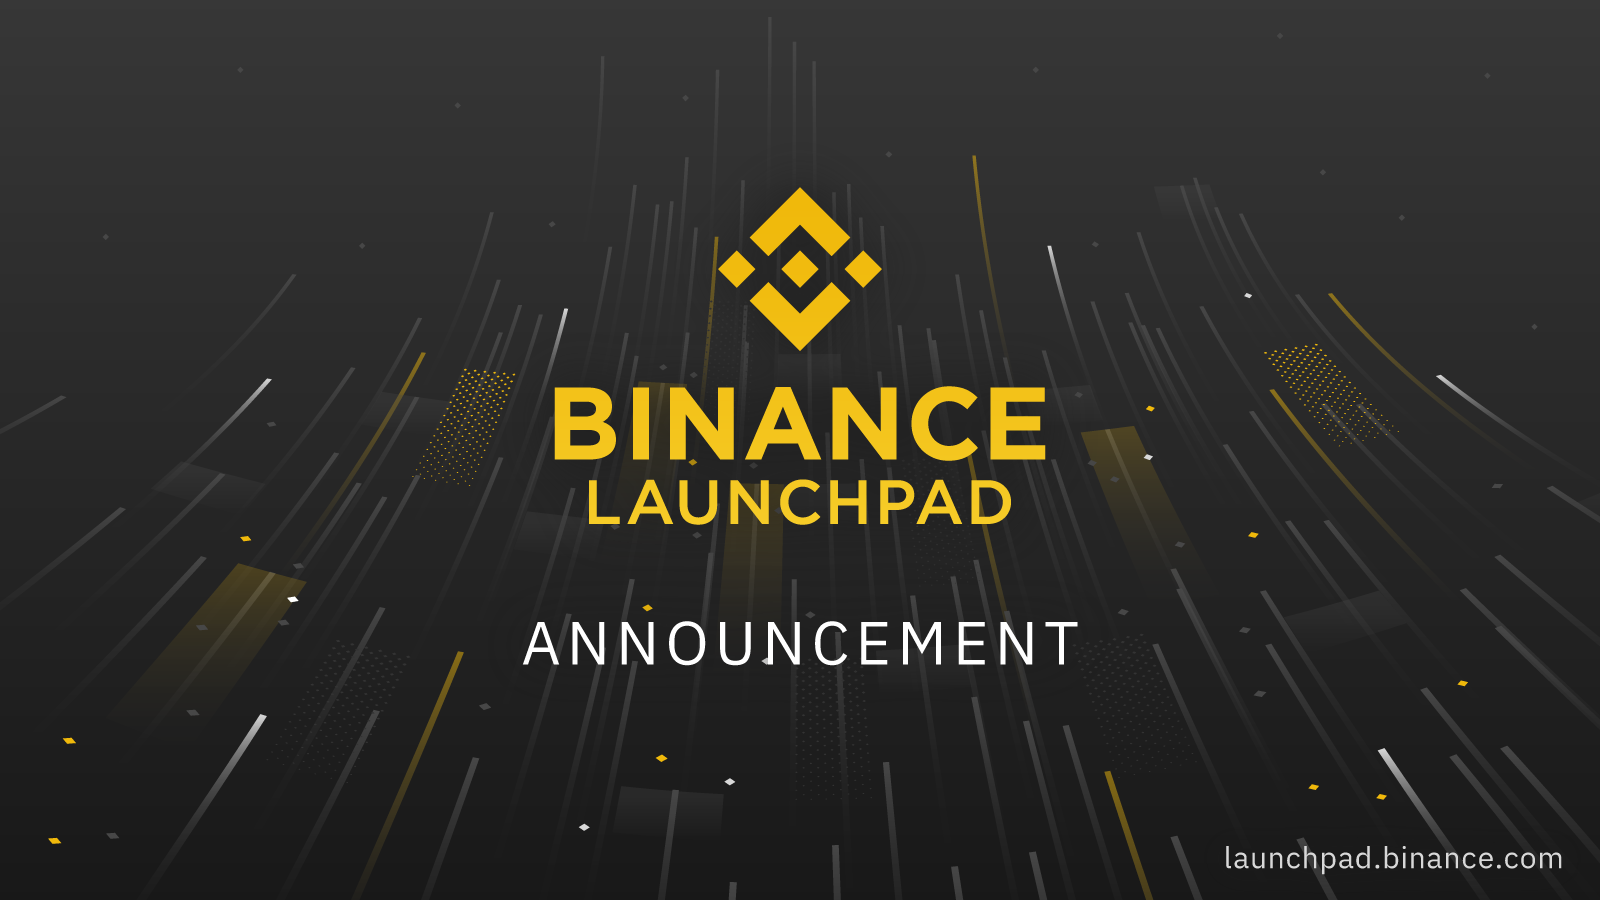 Update To The Binance Launchpad Token Sale Format